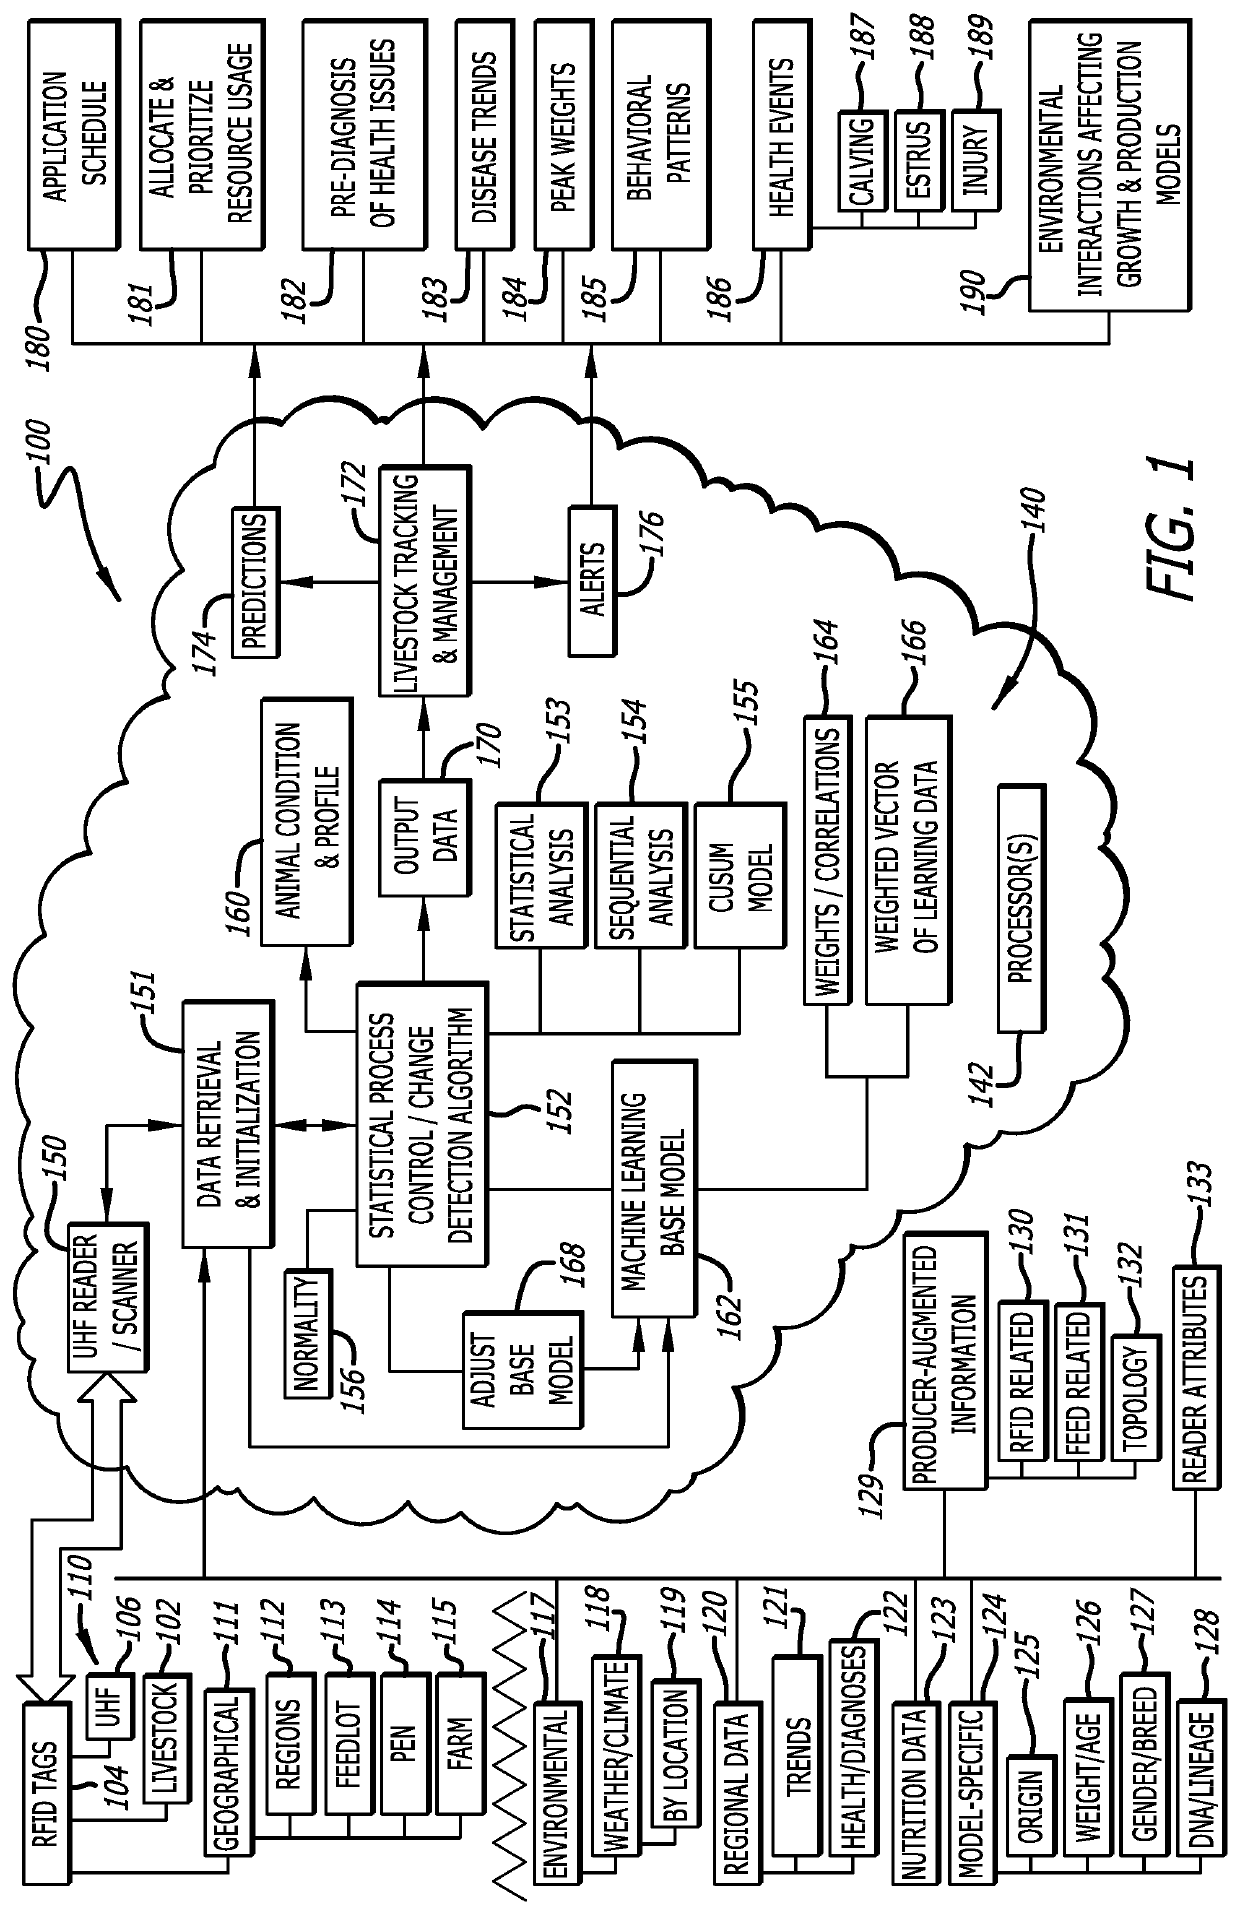 Livestock and feedlot data collection and processing using UHF-band interrogation of radio frequency identification tags